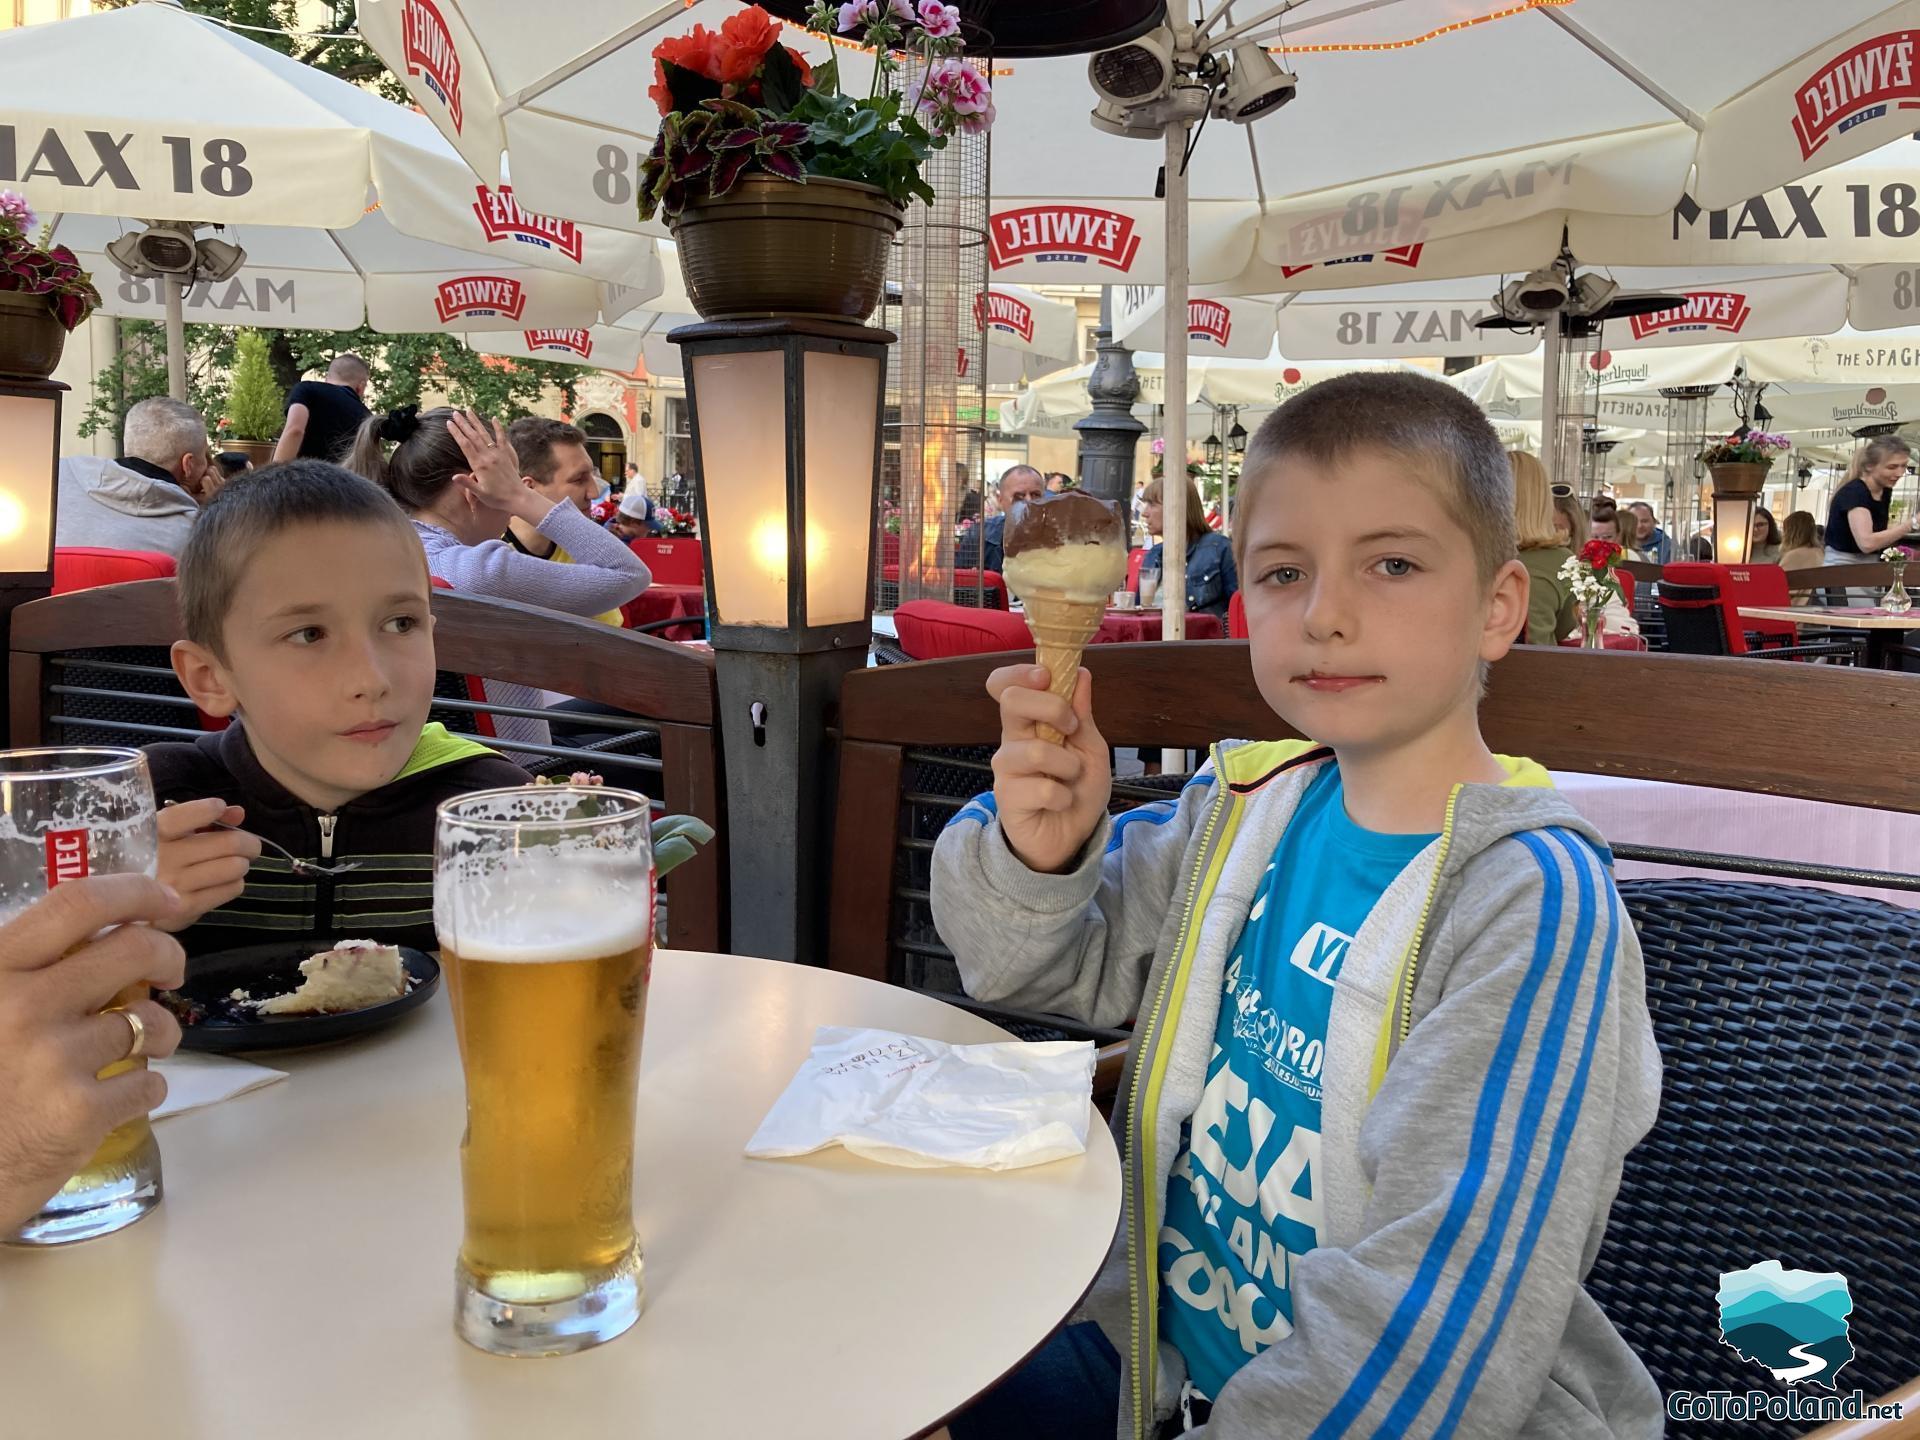 a family is sitting in a outside restaurant, a glass of beer is on the table, one boy is eating an ice-cream, the second boy is eating a cake